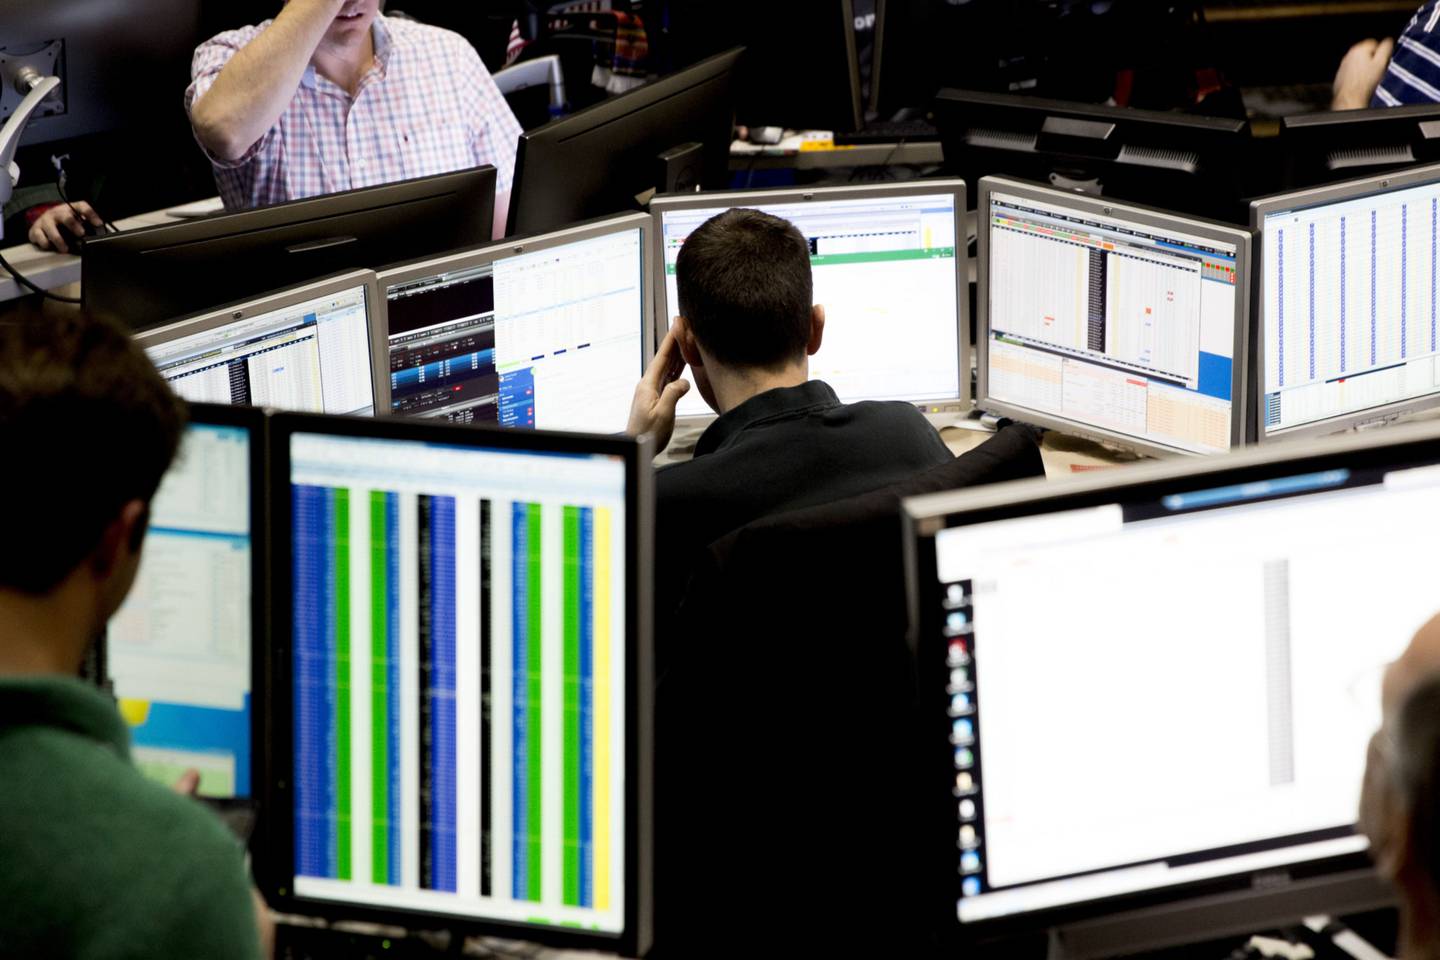 A trader looks over computer monitors as he works in the Cboe Volatility Index (VIX) pit on the floor of the Cboe Global Markets, Inc. exchange in Chicago, Illinois, U.S., on Wednesday, Feb. 14, 2018. Signs of an inflation pickup have roiled financial markets this month, and stock futures tumbled early Wednesday on concern the Fed would quicken its pace of tightening following data that showed faster-than-forecast inflation. Those fears receded as investors digested a separate report showing weak retail sales that raised questions about the economys strength.